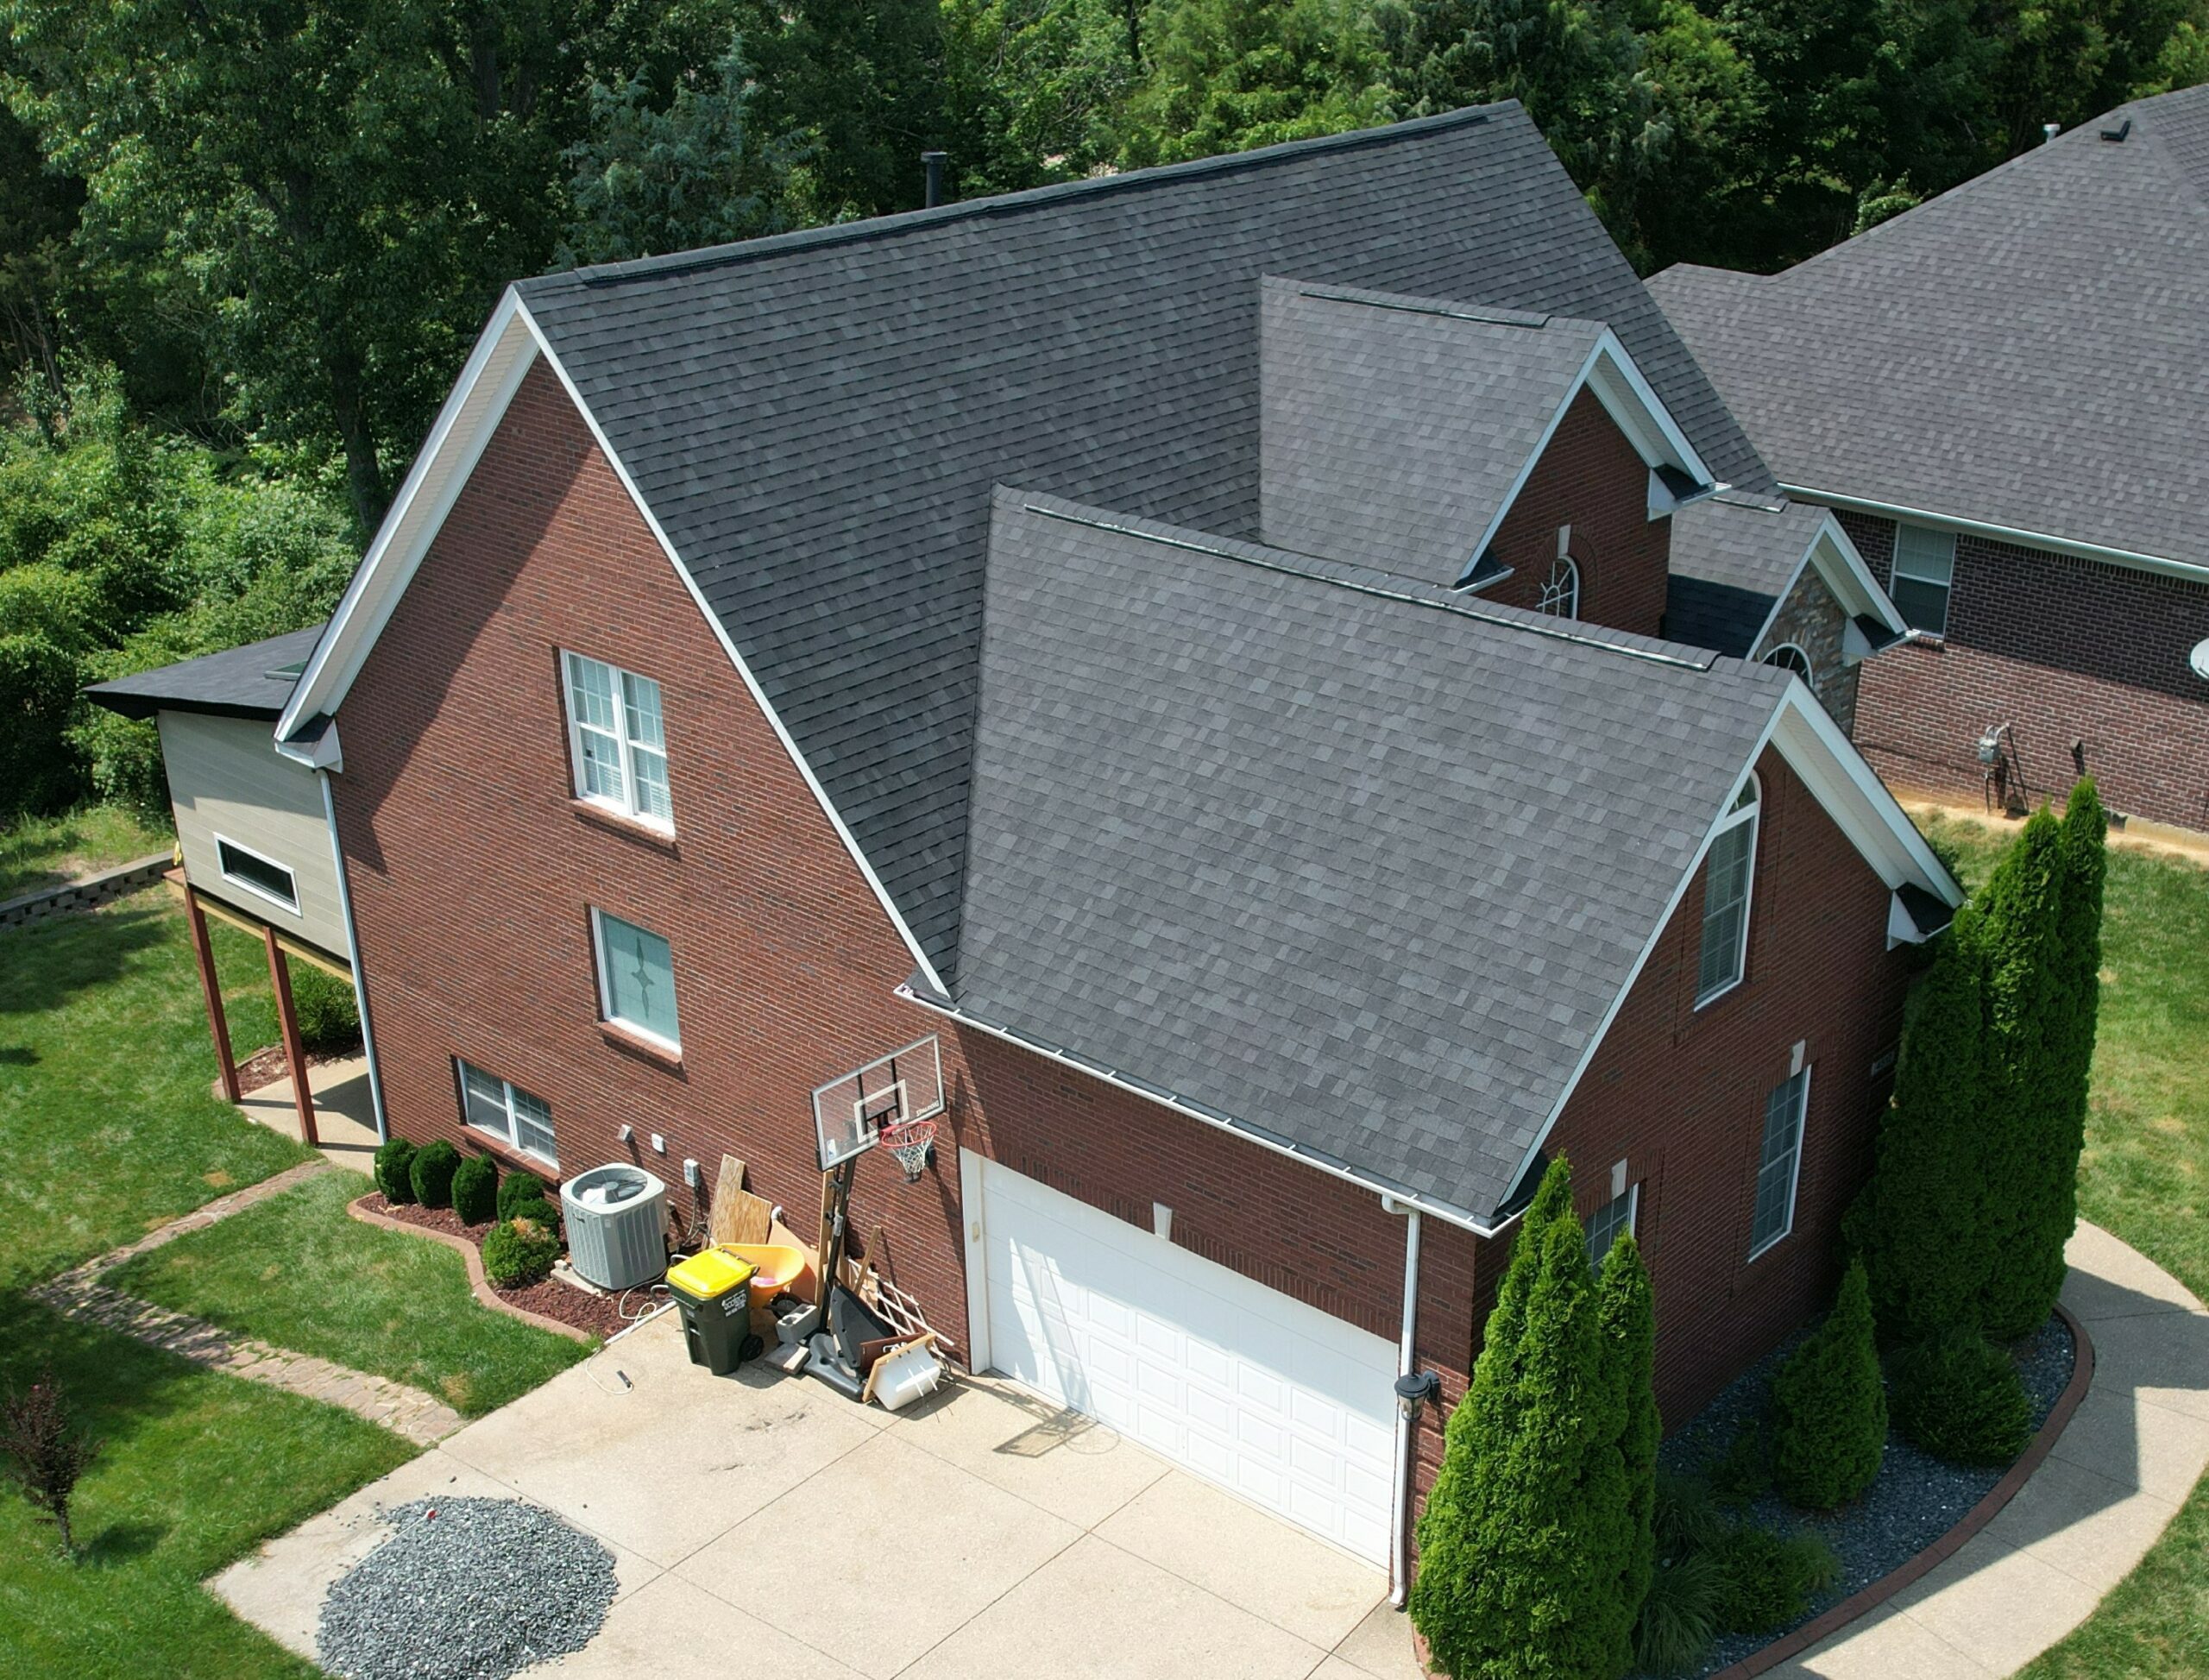 House with newly replaced onyx black shingles